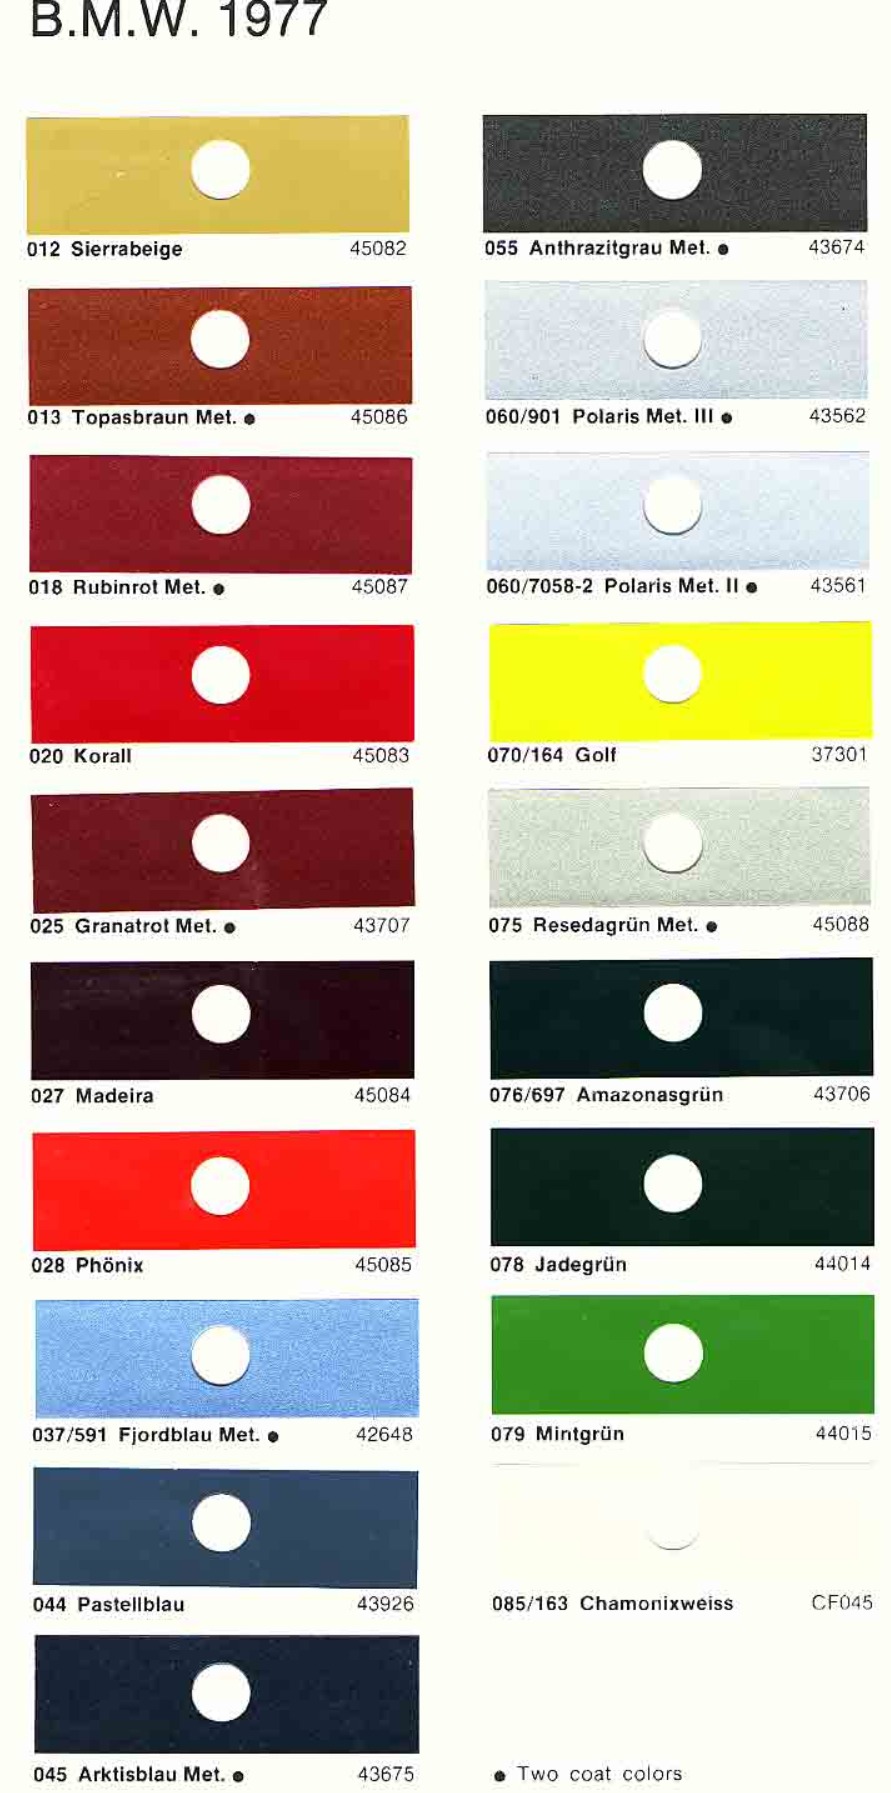 exterior paint colors and their ordering codes for bmw vehicles